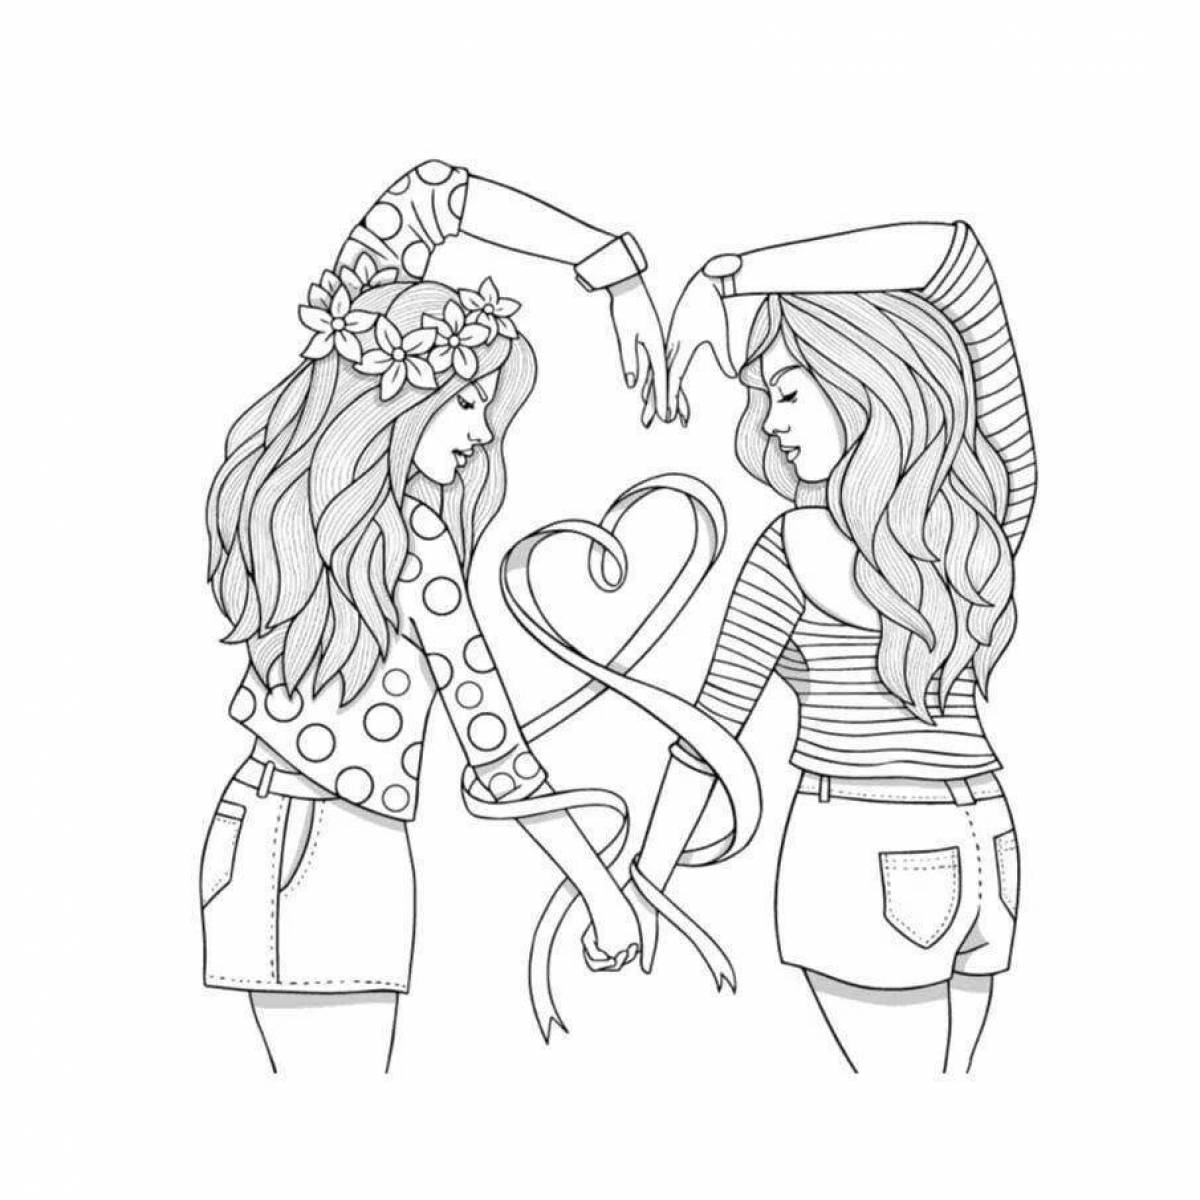 Coloring page charming girlfriends